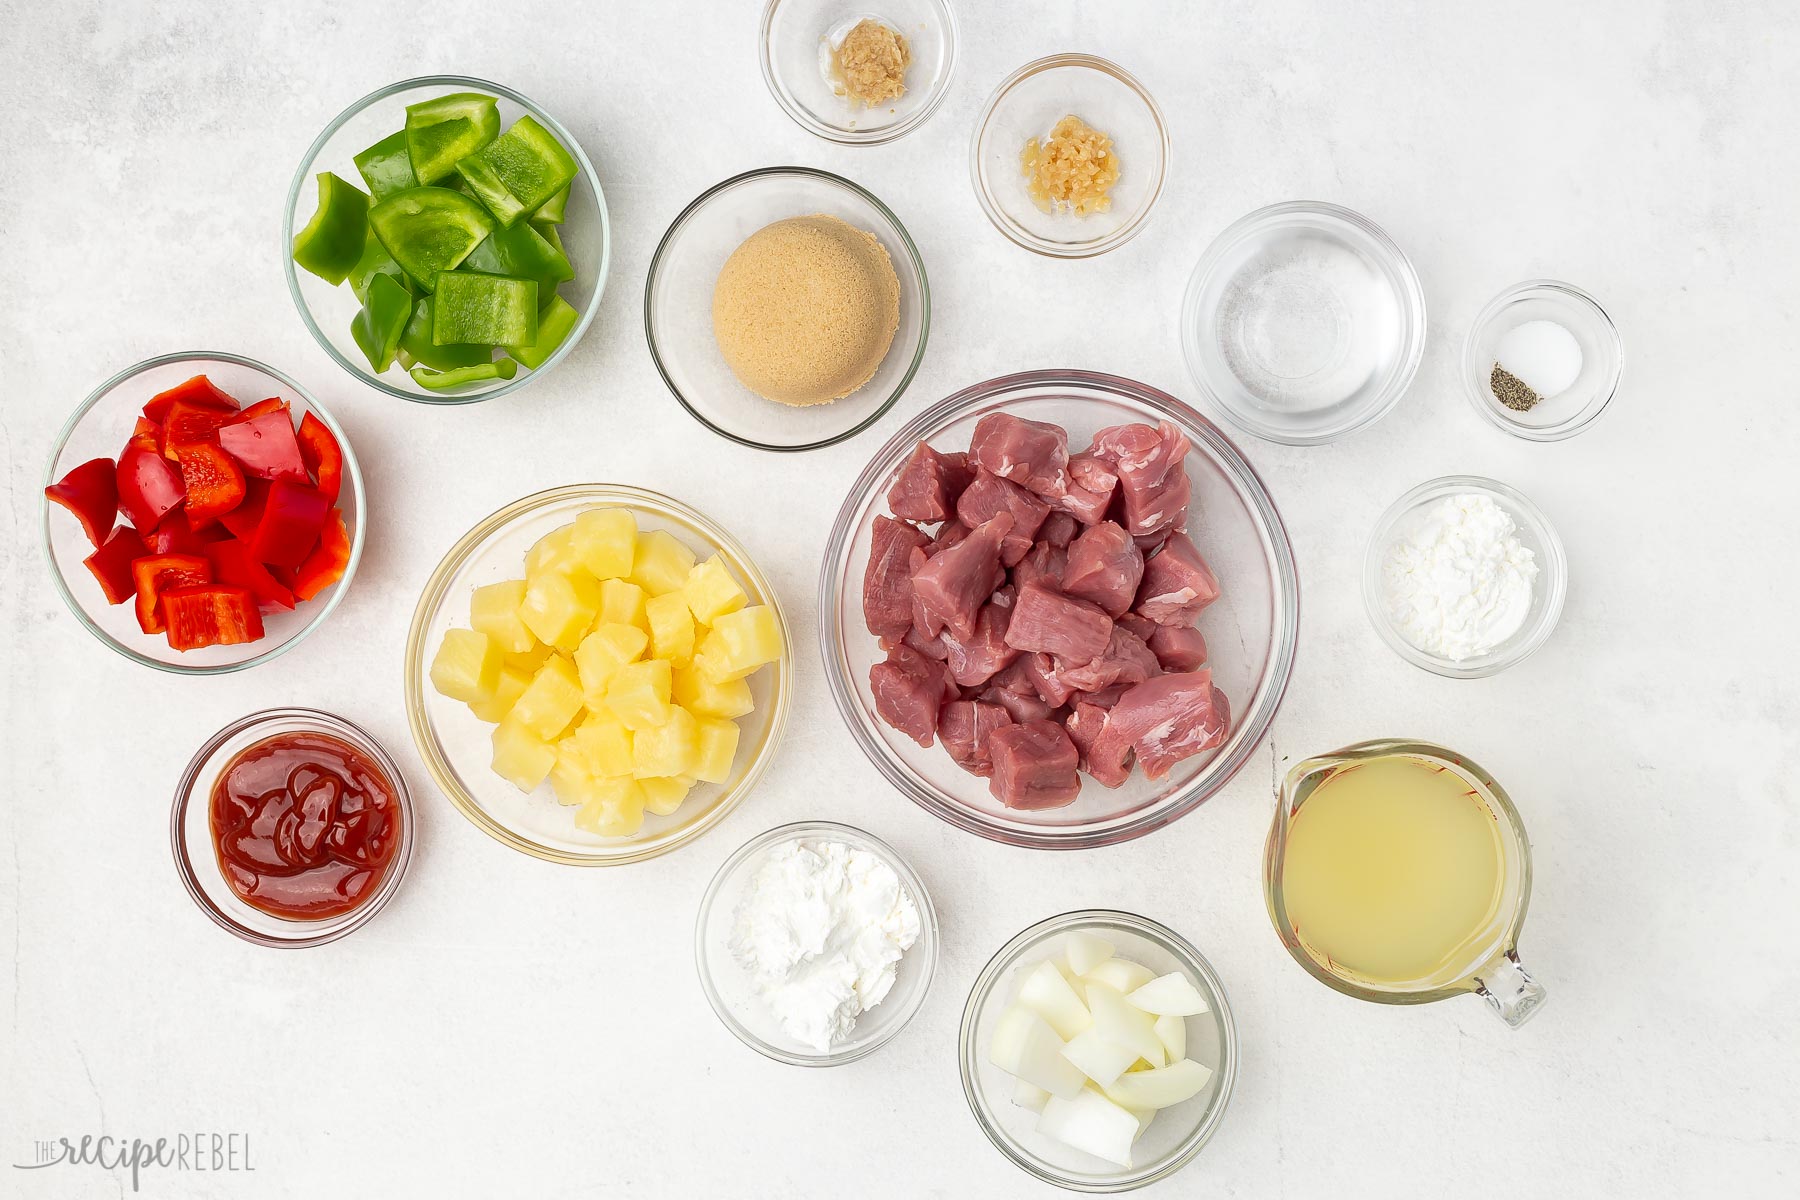 Top view of ingredients needed for sweet and sour pork in small glass bowls. 